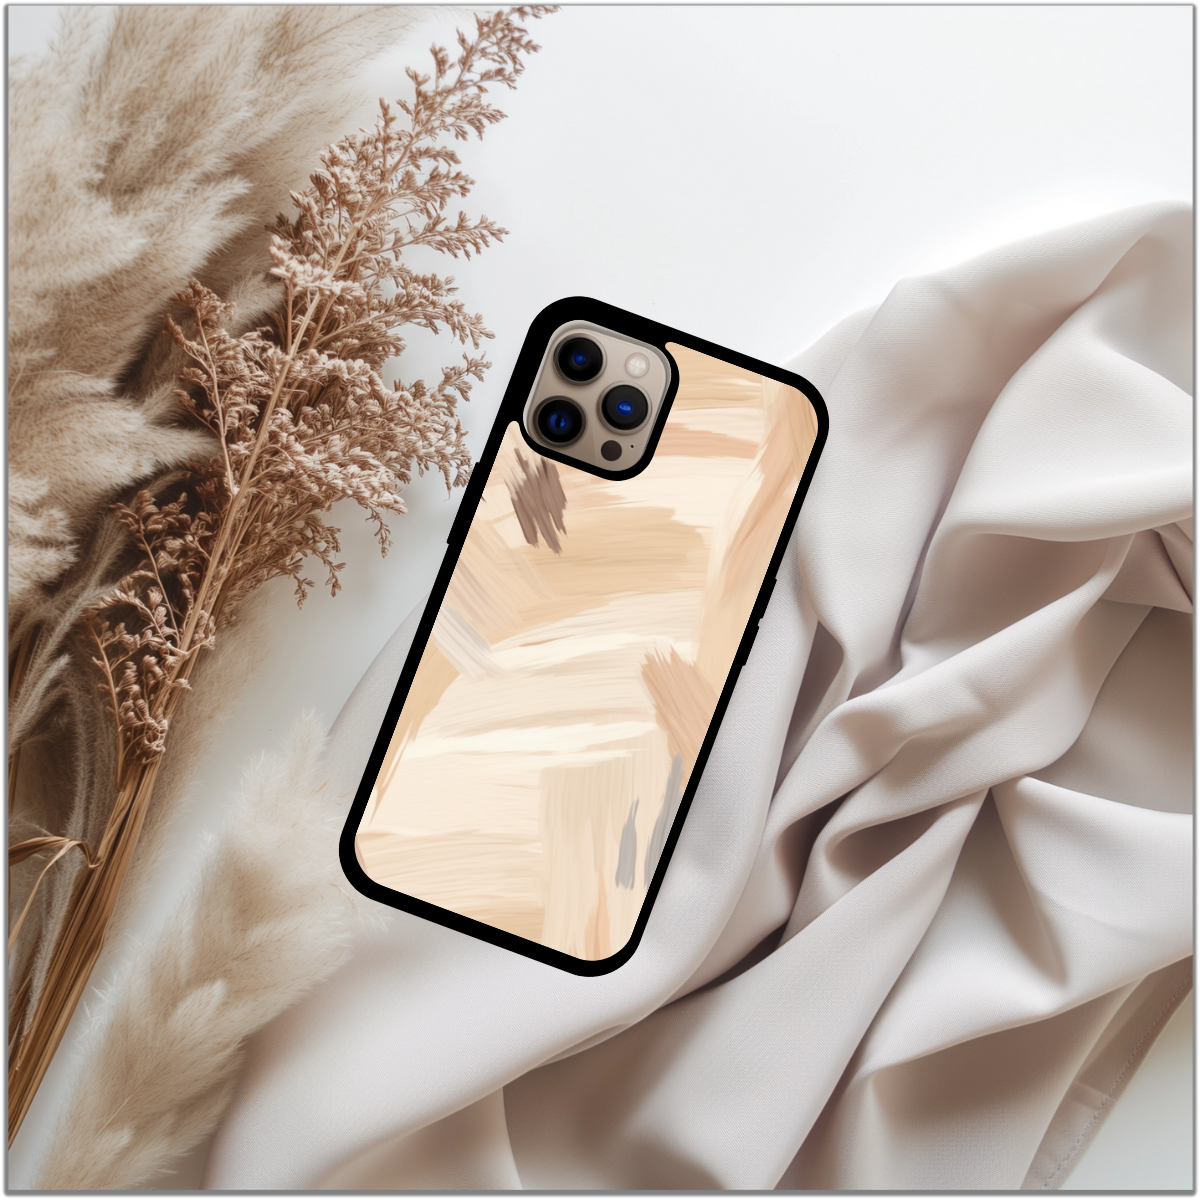 Abstract Brushstrokes phone case perfect gift for her - cute phone case - best birthday gift - iphone case - girly phone case - pretty phone case - artsy phone case